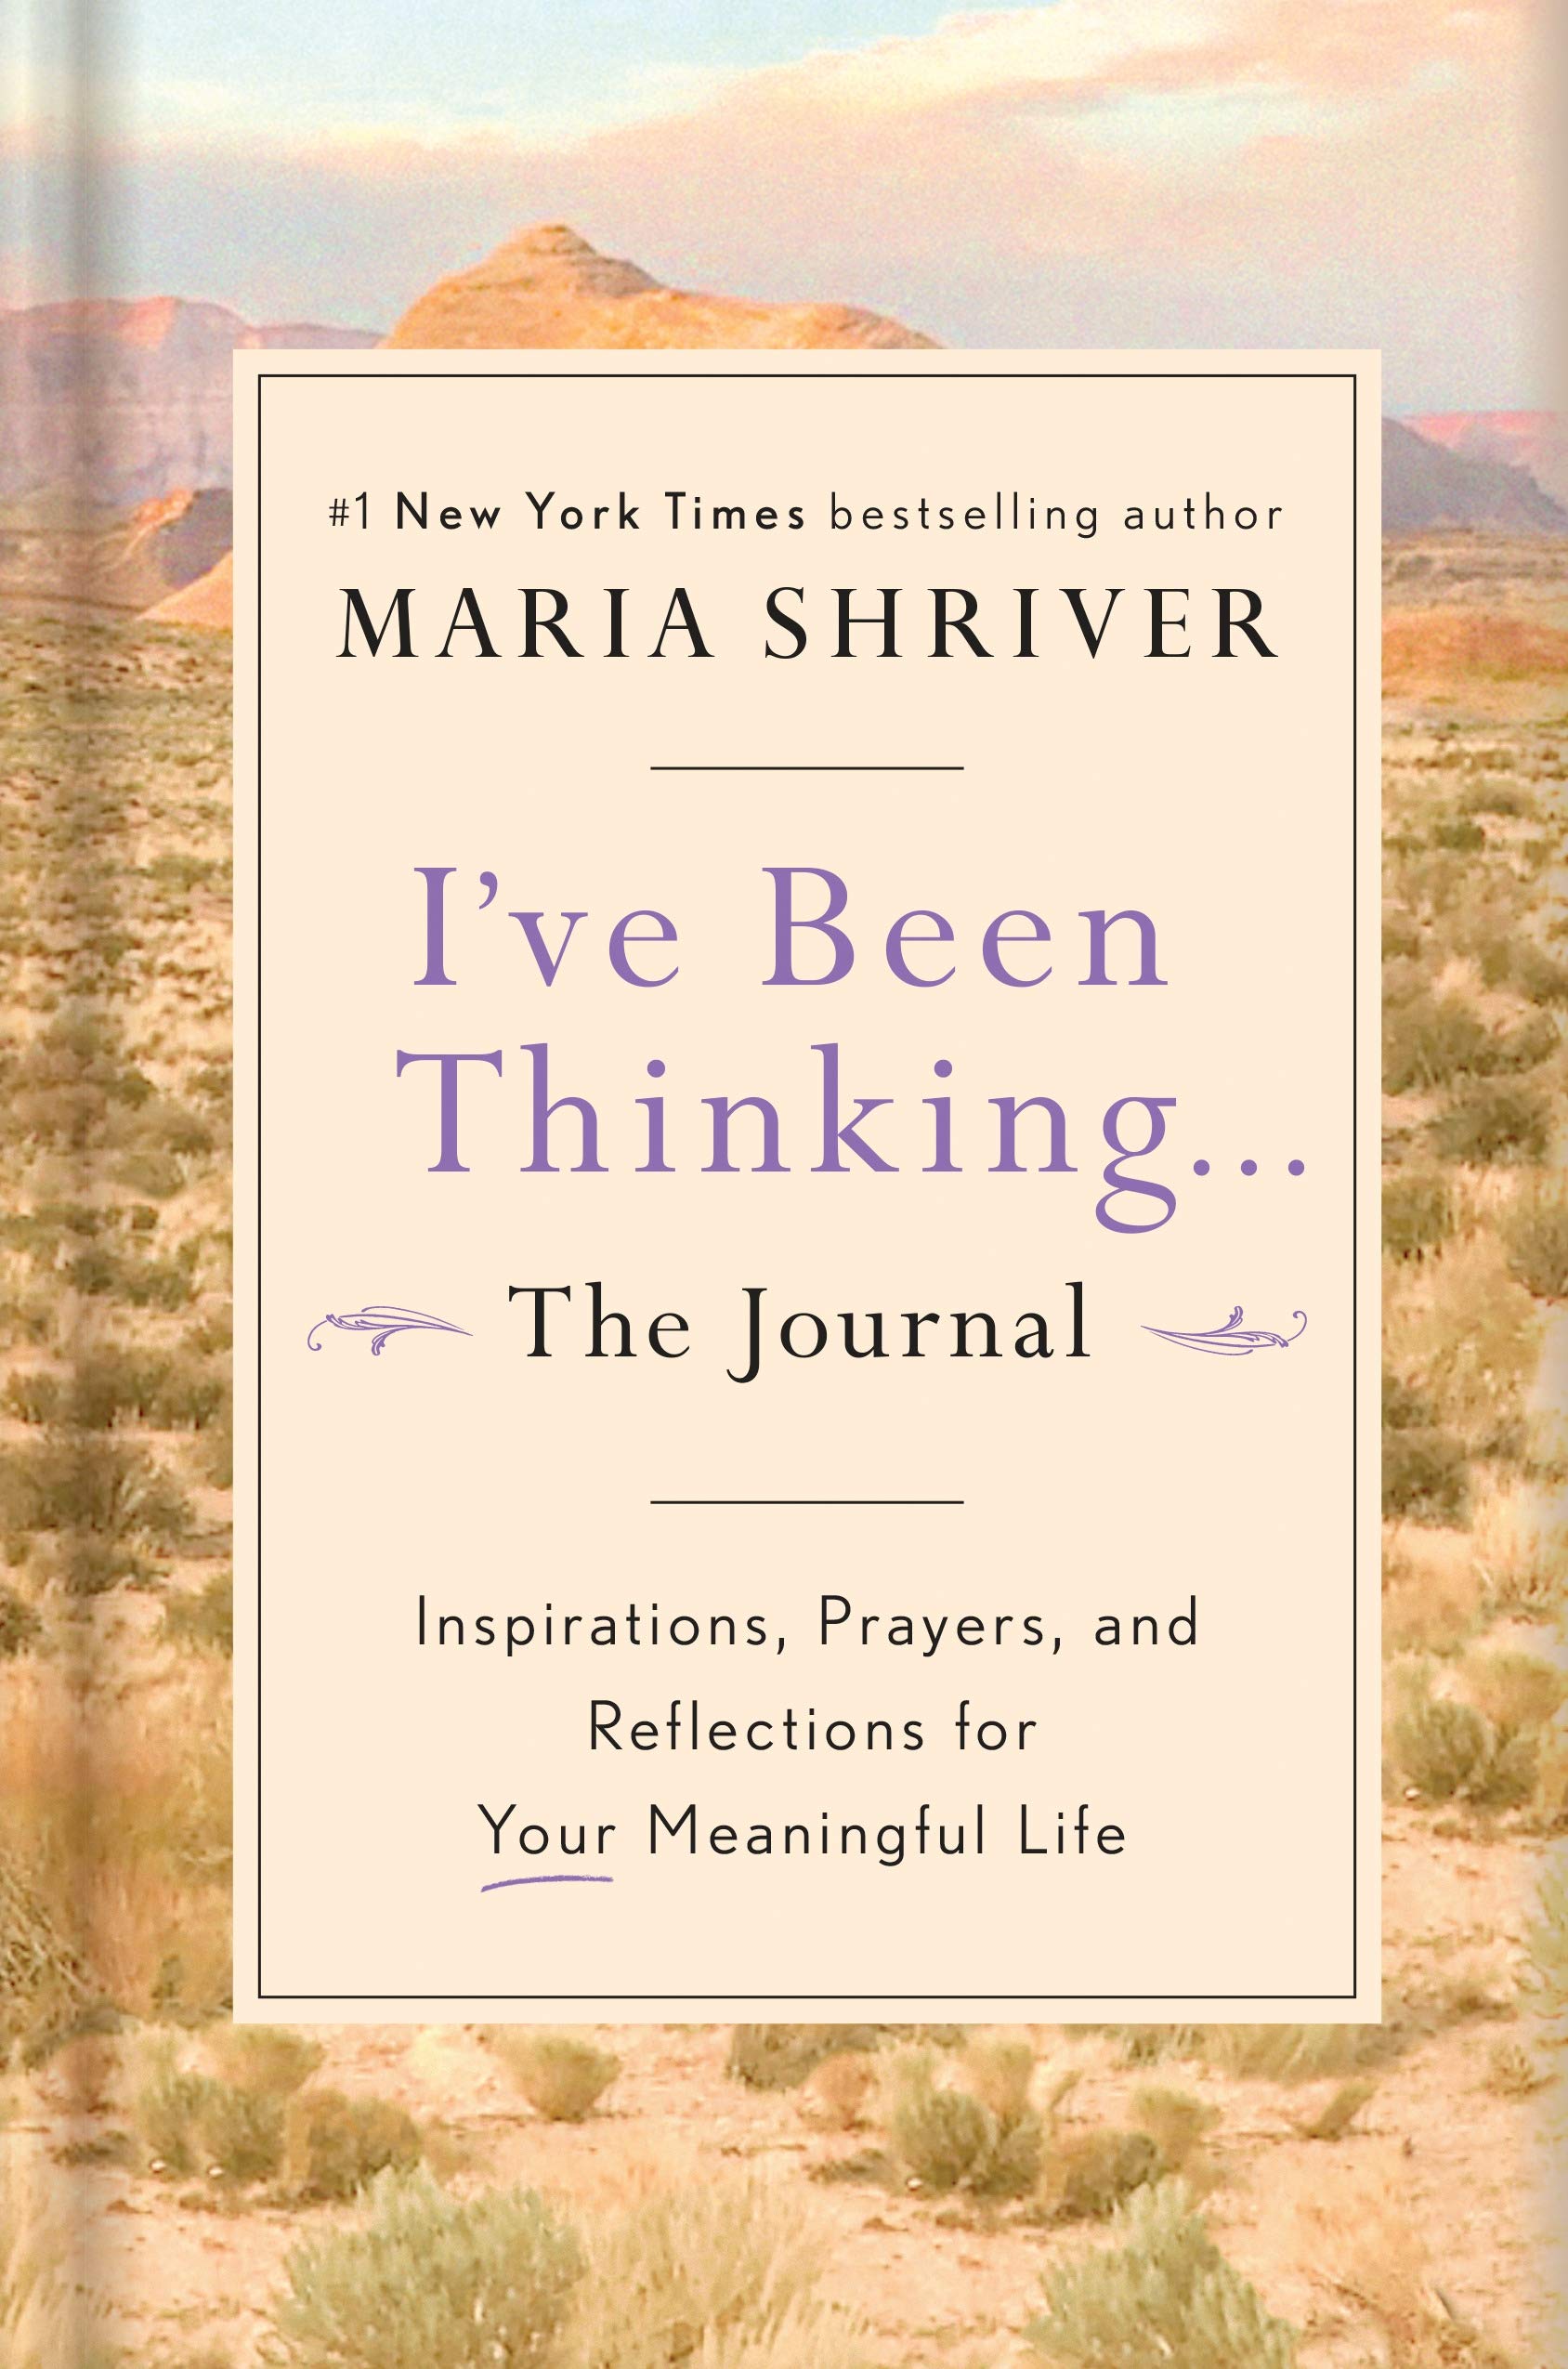 I've Been Thinking . . . The Journal: Inspirations, Prayers, and Reflections for Your Meaningful Life in hardcover. | Source: Amazon.cm